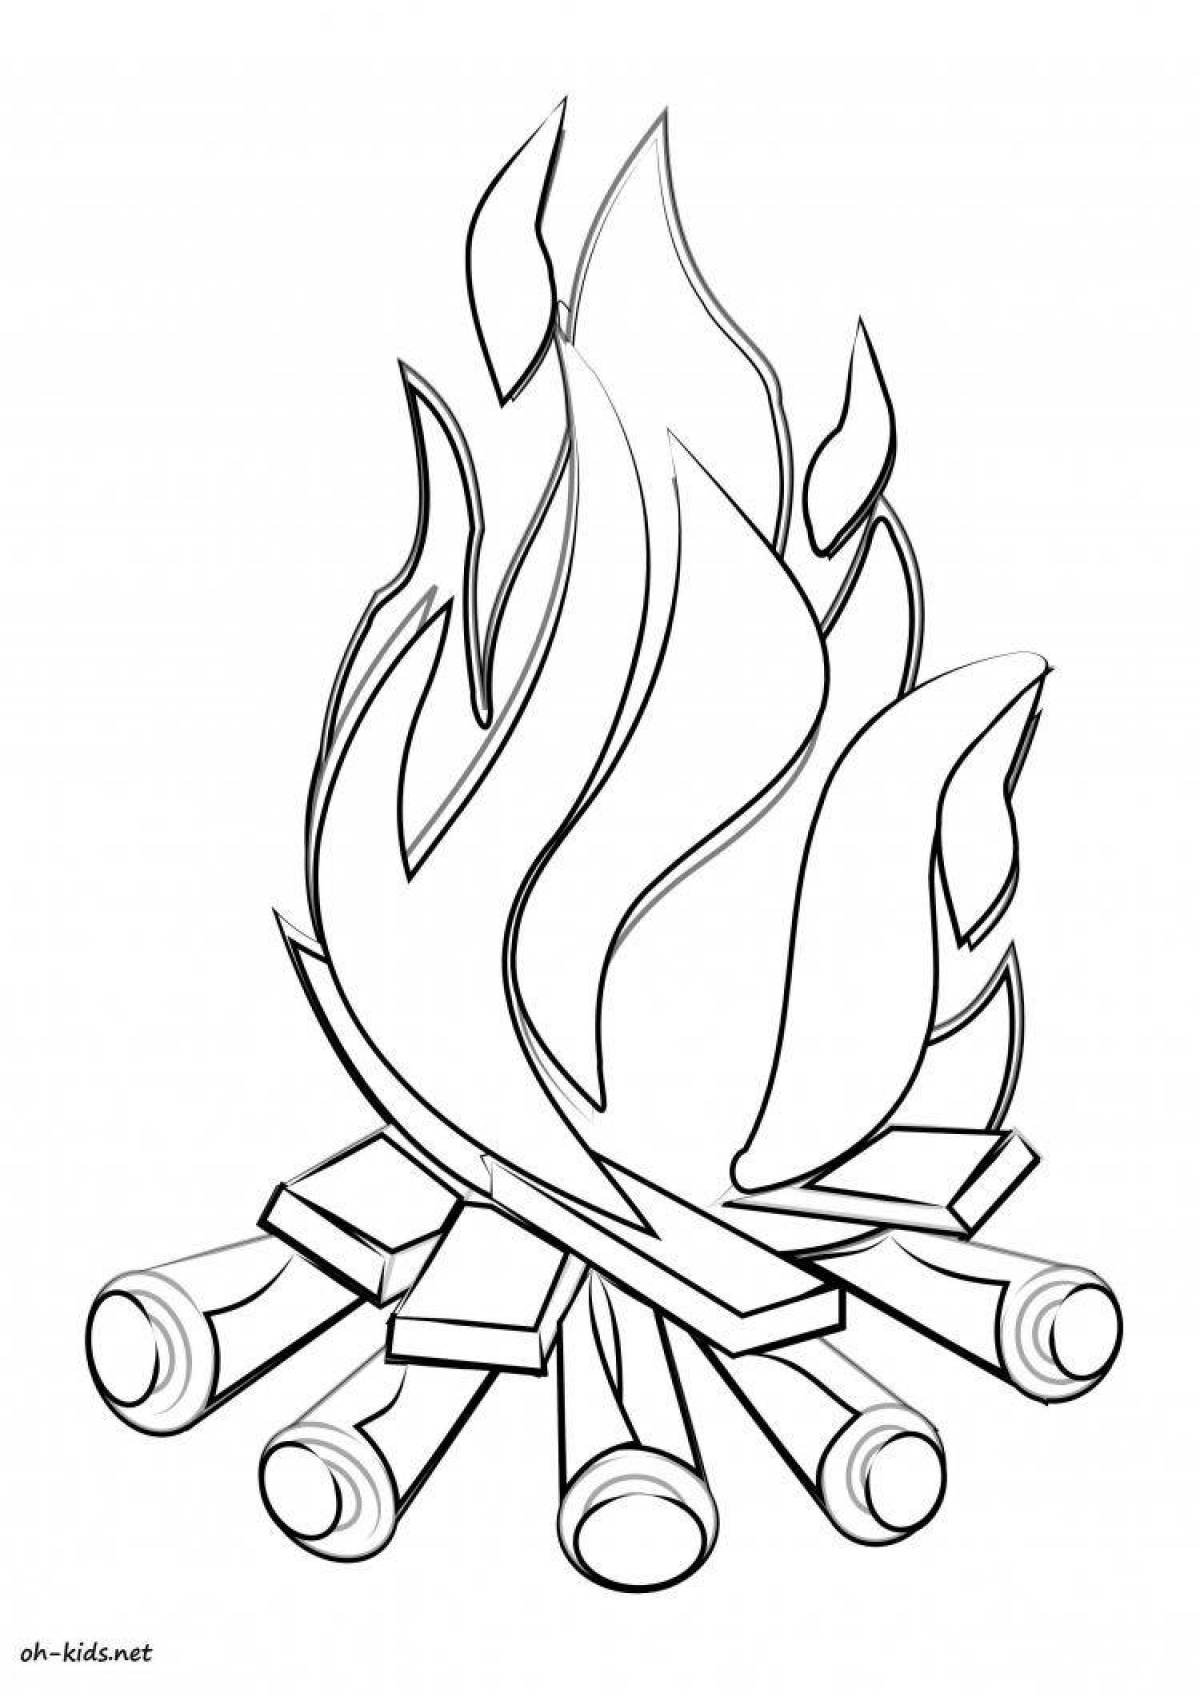 Brightly colored May 9 eternal flame coloring page